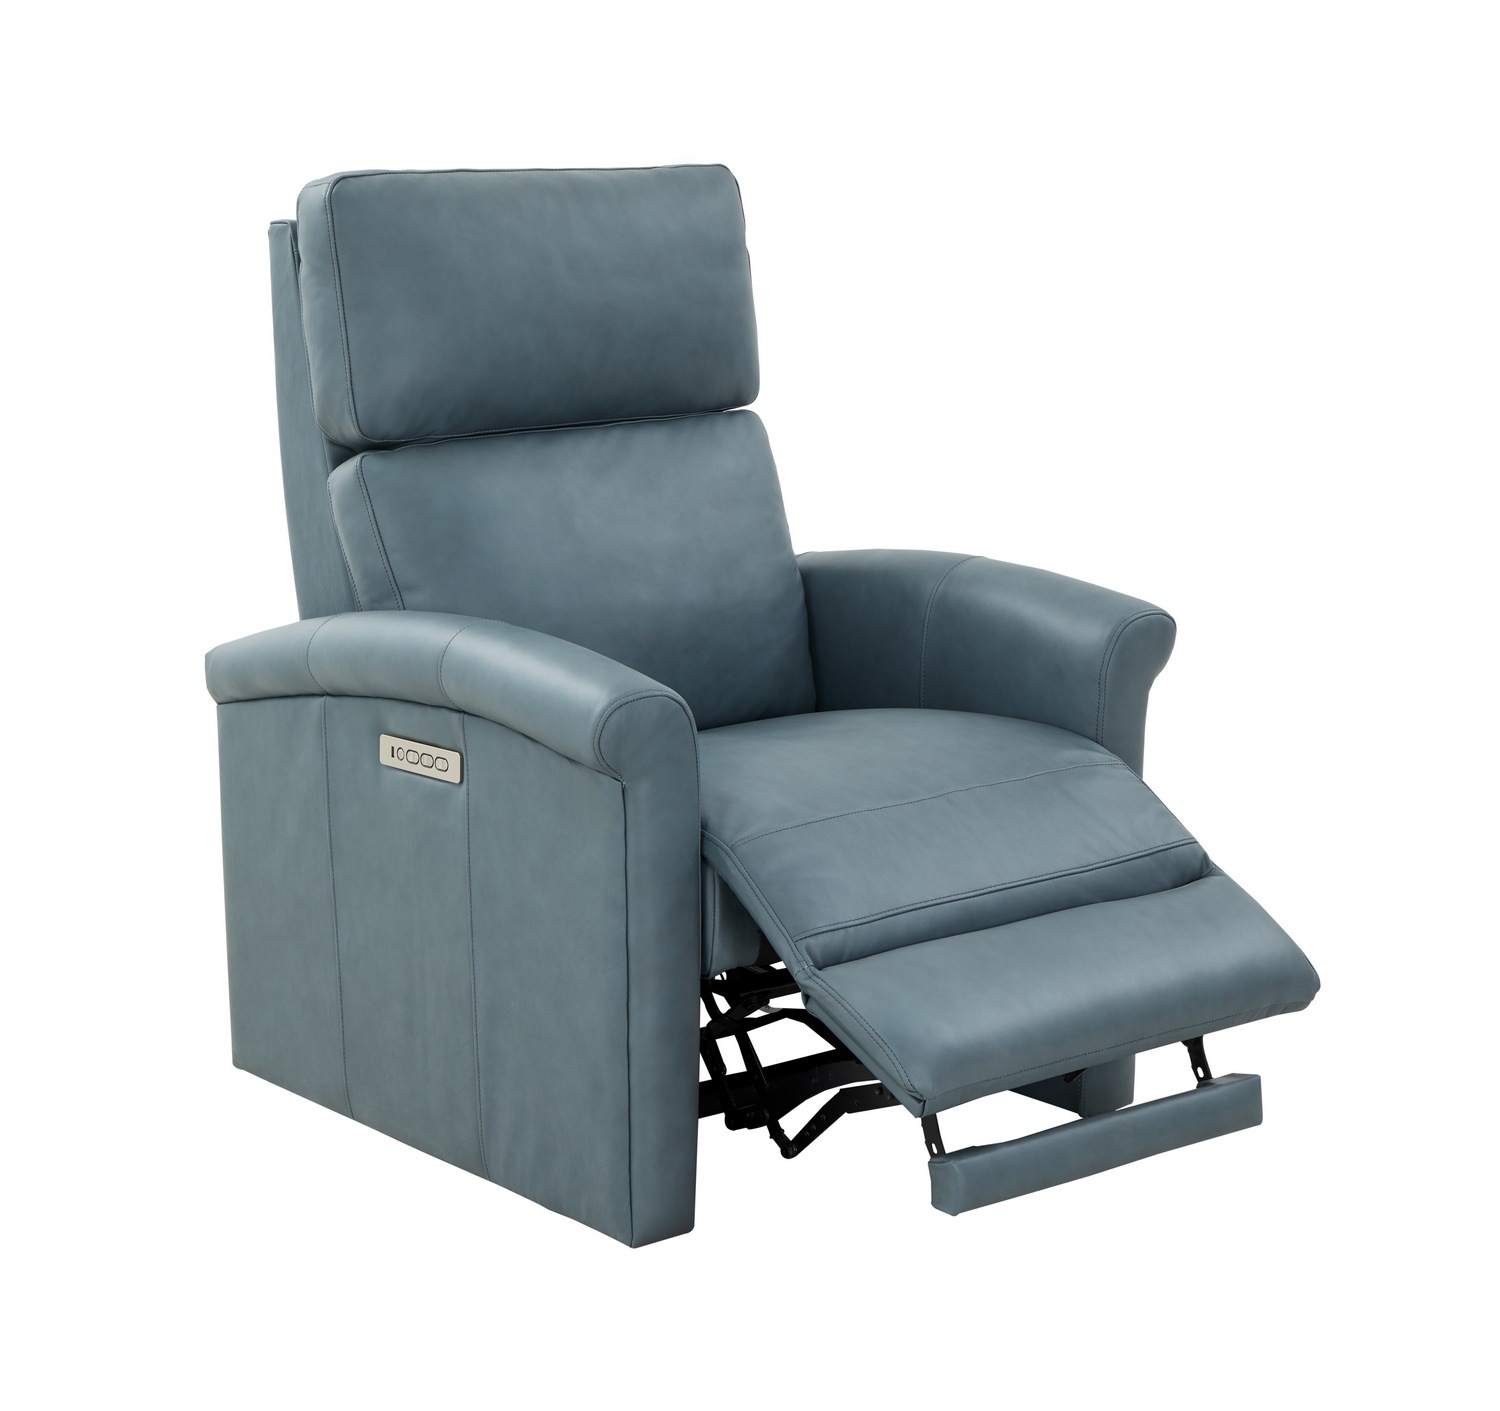 Barcalounger Jaxon Zero Gravity Power Recliner Chair with Power Head Rest and Lumbar - Corbett Steel Gray/All Leather